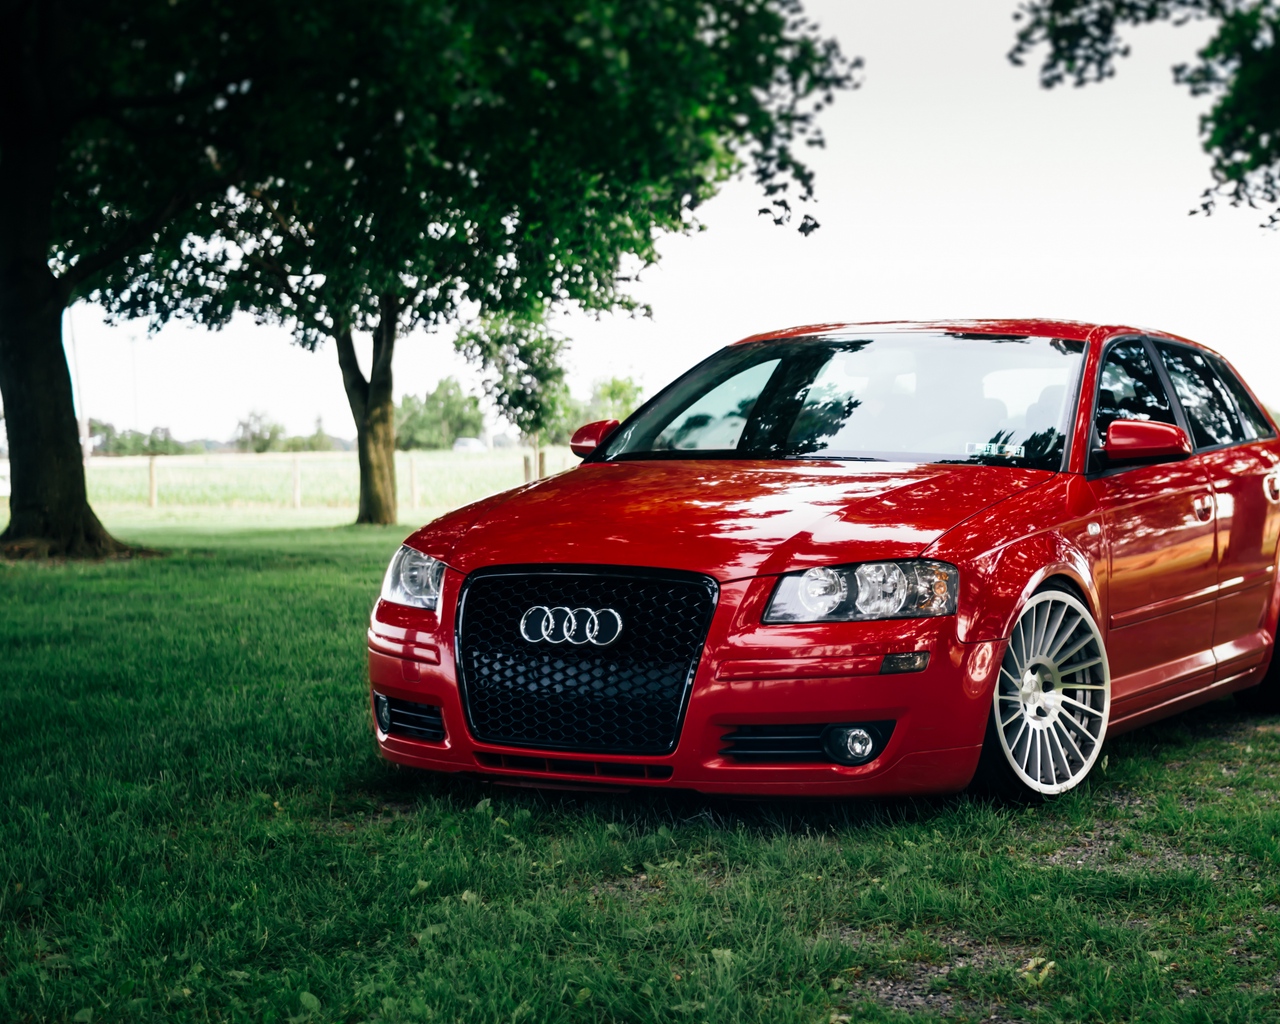 Download wallpaper 1280x1024 audi a3 red front view auto grass 1280x1024